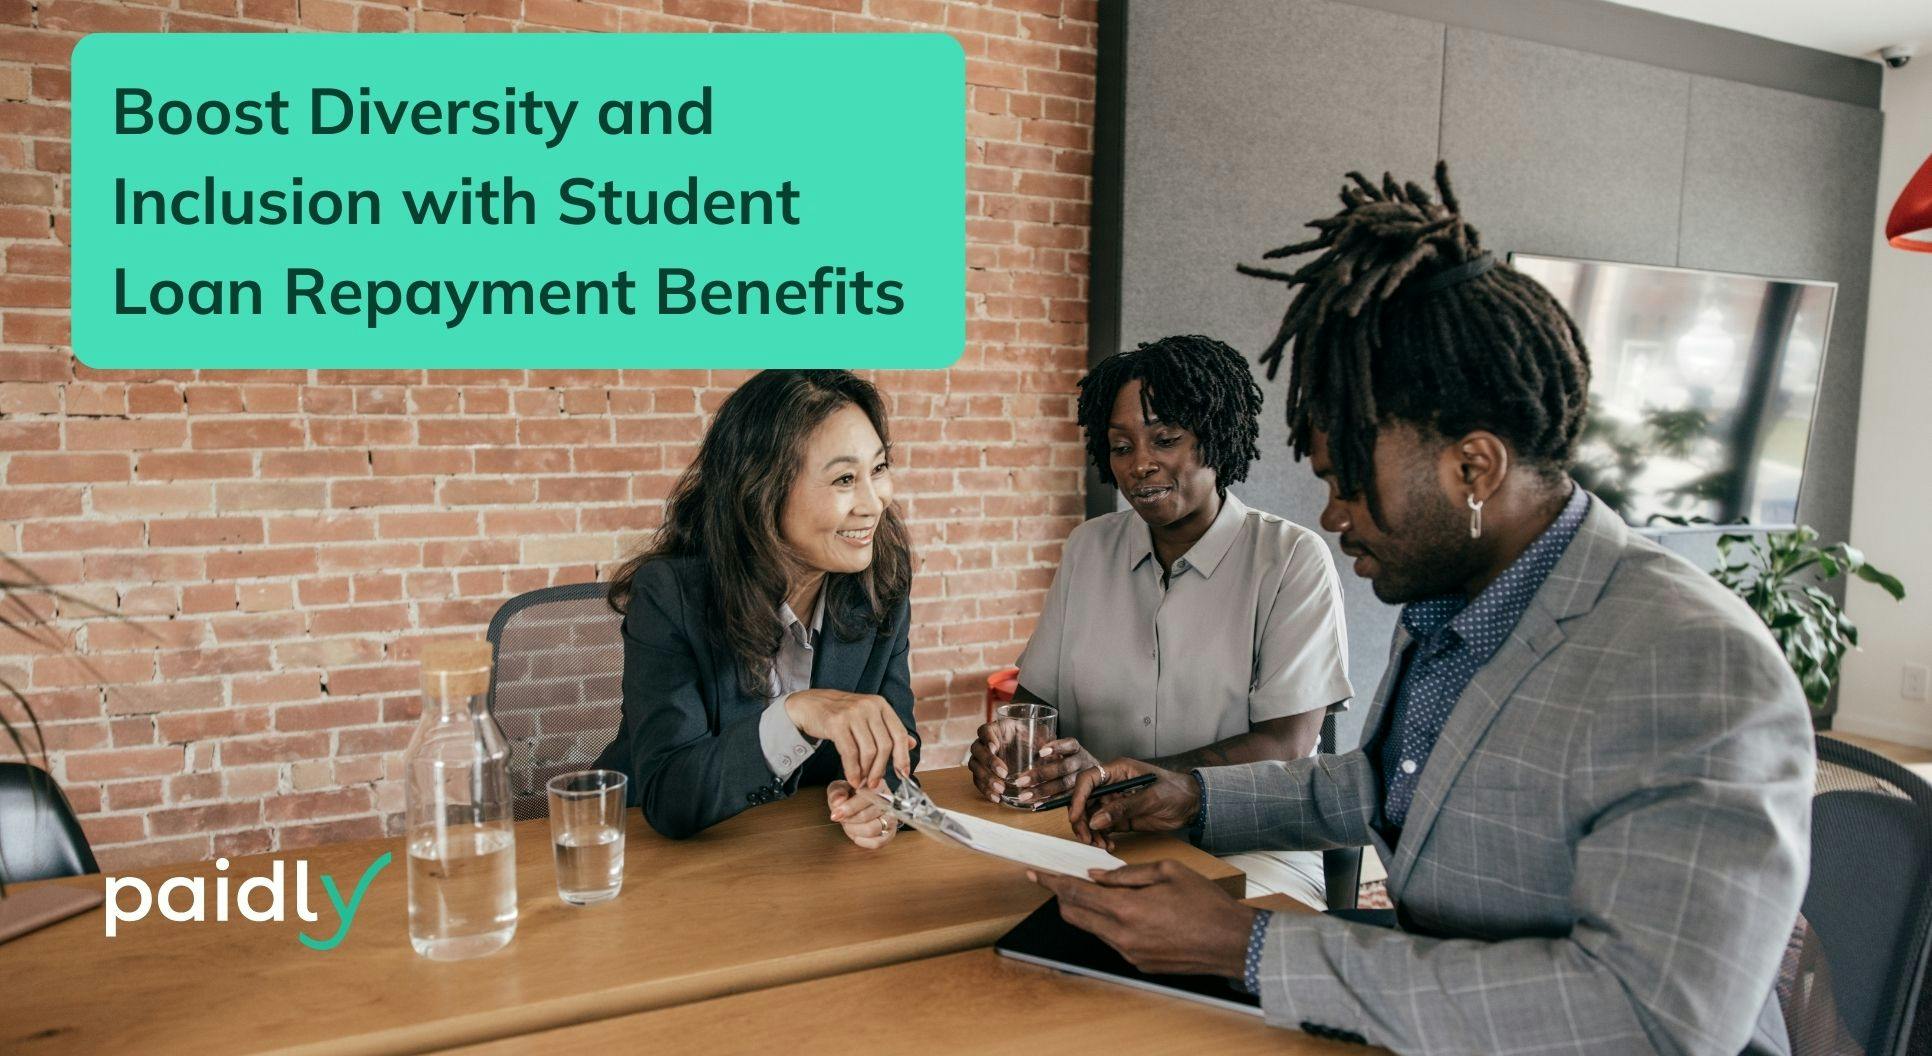 Hiring manager showing diversity and inclusion with student loan repayment benefits.